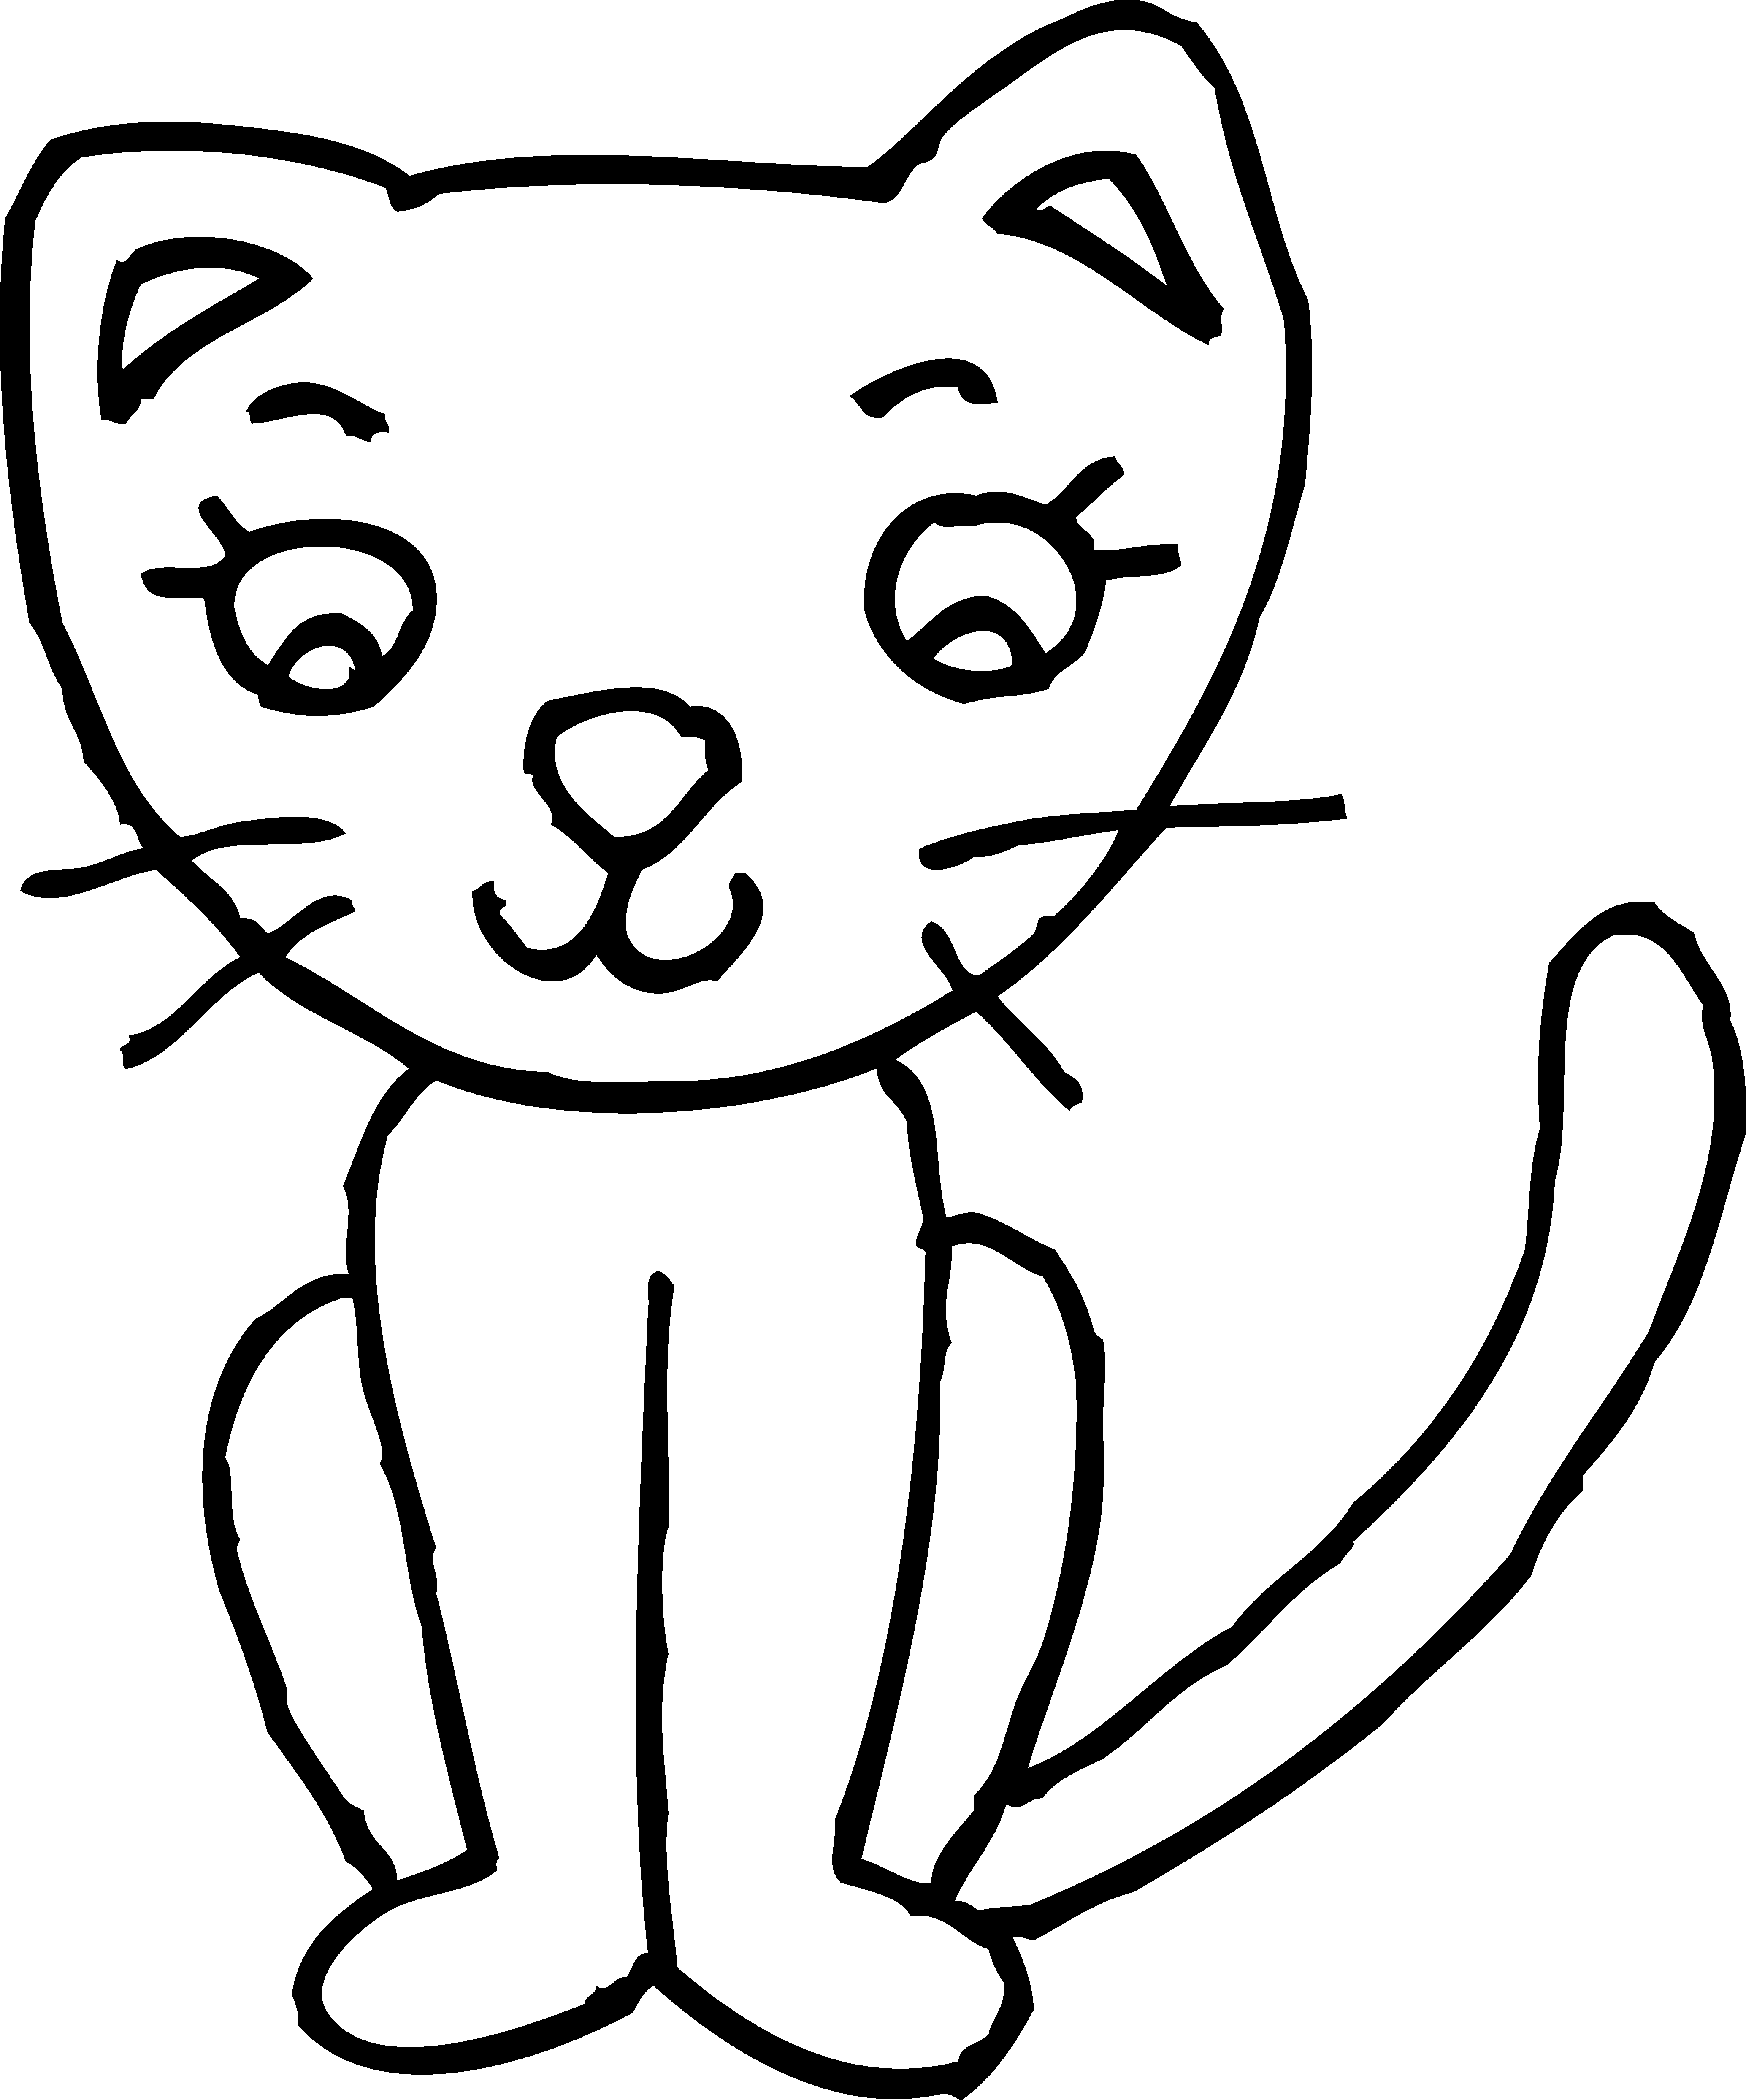 Cat Clipart Black And White - ClipArt Best